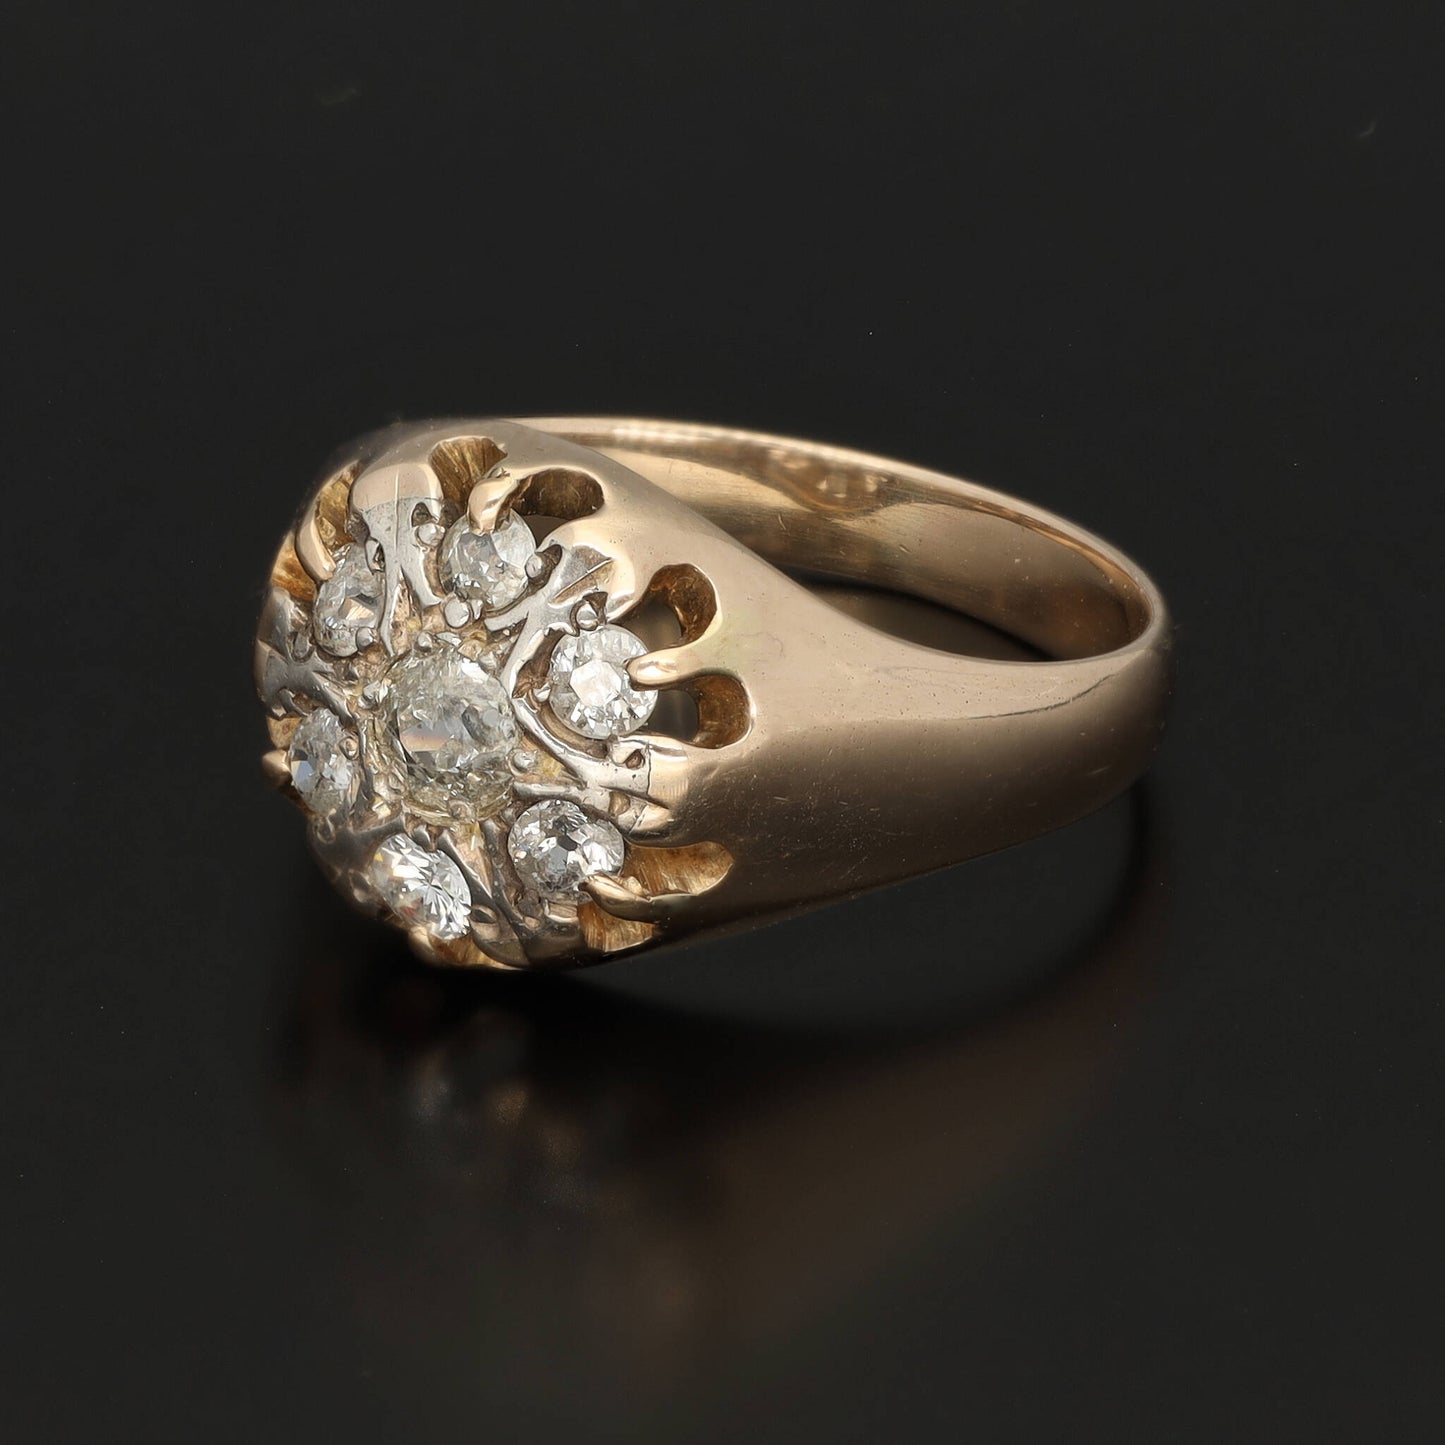 A substantial unisex diamond signet ring in solid 14k gold. This yellow gold signet ring is preserved in a superb condition and is fully hallmarked. The crown carries six 0.15 CT diamonds and the central diamond of circa 0.25 CT. The stones have a good quality SI1-2 and E-F color.   The face of the ring has a white gold plating surrounding the stones to enhance their shine. The body is made of yellow gold. The ring is a perfect vintage condition, cleaned and with serviced prongs.